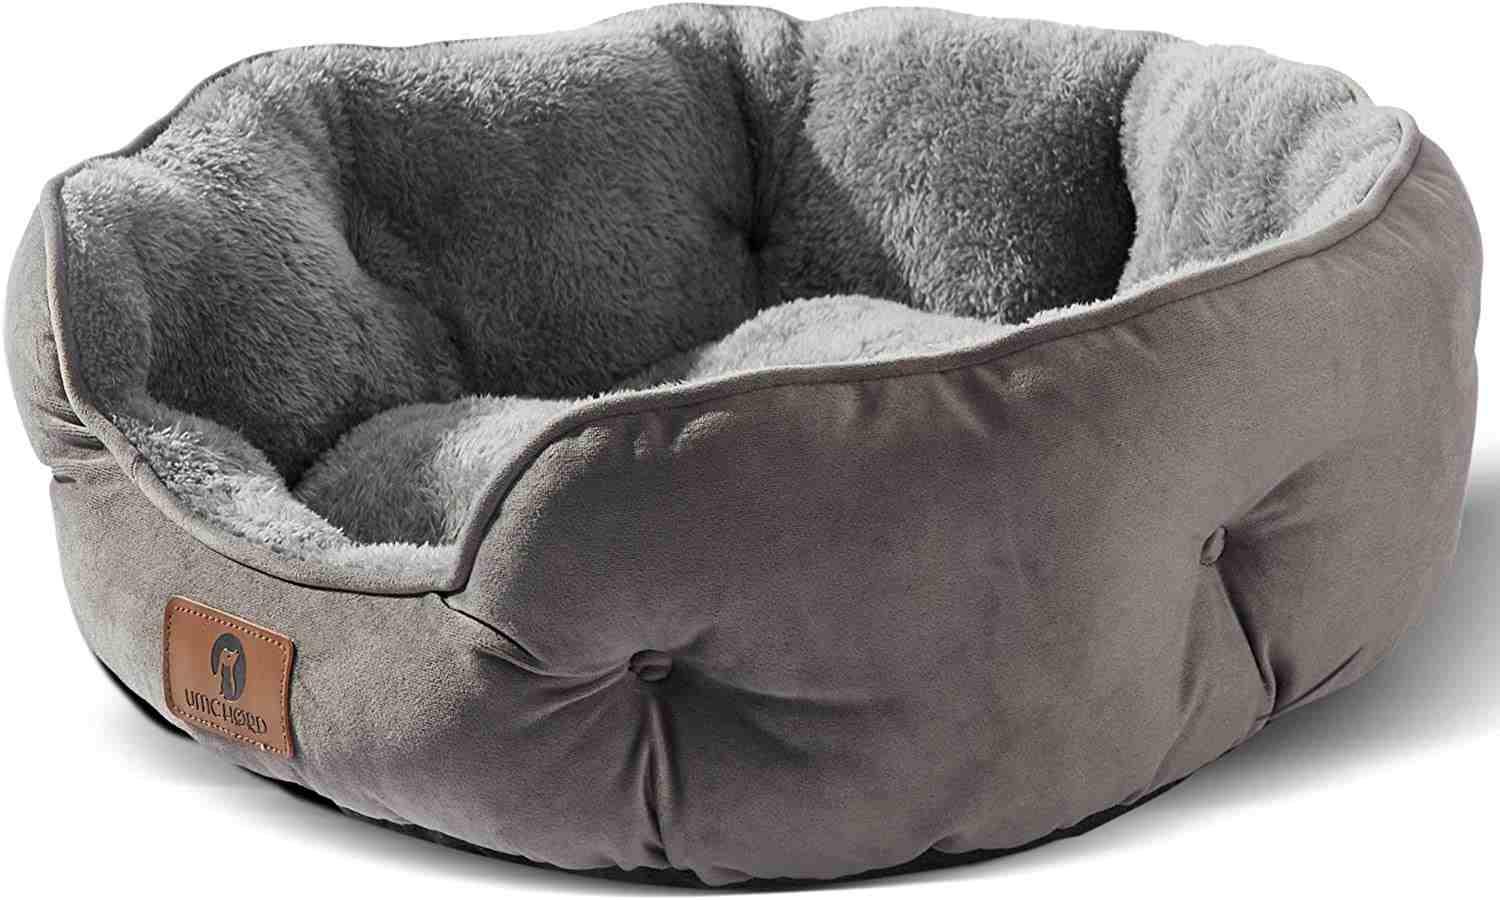 Asvin Small Dog Bed for Small Dogs, Cat Beds for Indoor Cats, Pet Bed for Puppy and Kitty, Extra Soft & Machine Washable with Anti-Slip & Water-Resistant Oxford Bottom, Grey, 20 inches